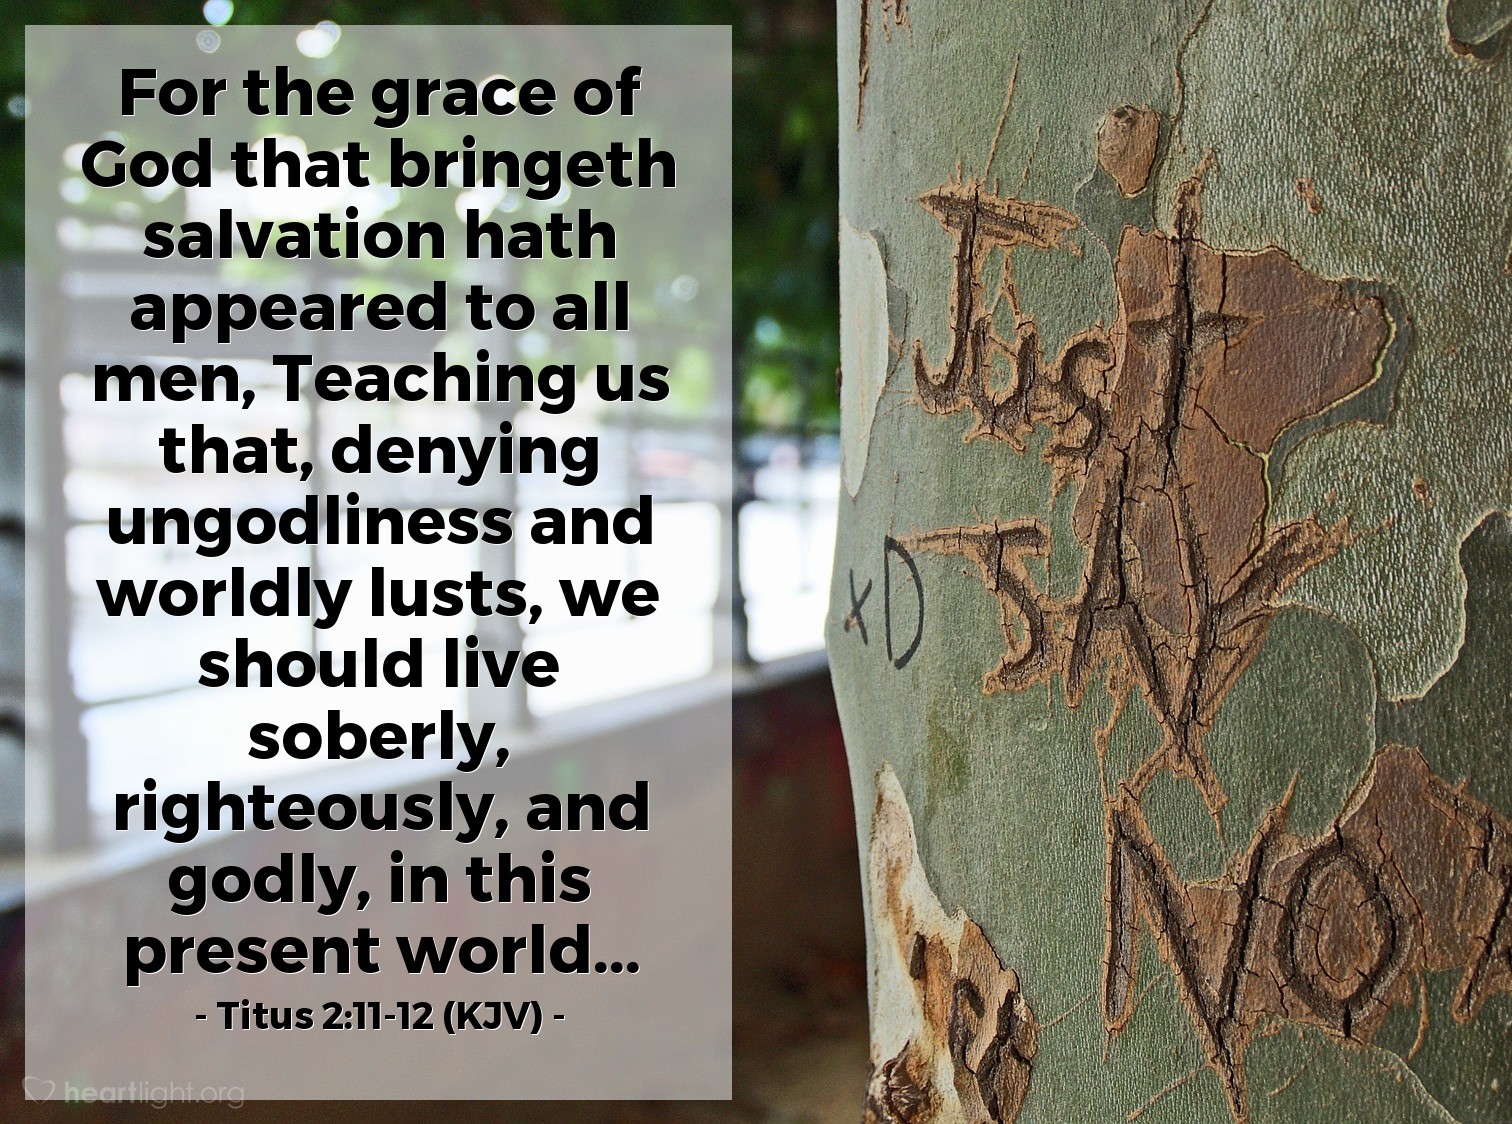 Illustration of Titus 2:11-12 (KJV) — For the grace of God that bringeth salvation hath appeared to all men, Teaching us that, denying ungodliness and worldly lusts, we should live soberly, righteously, and godly, in this present world...